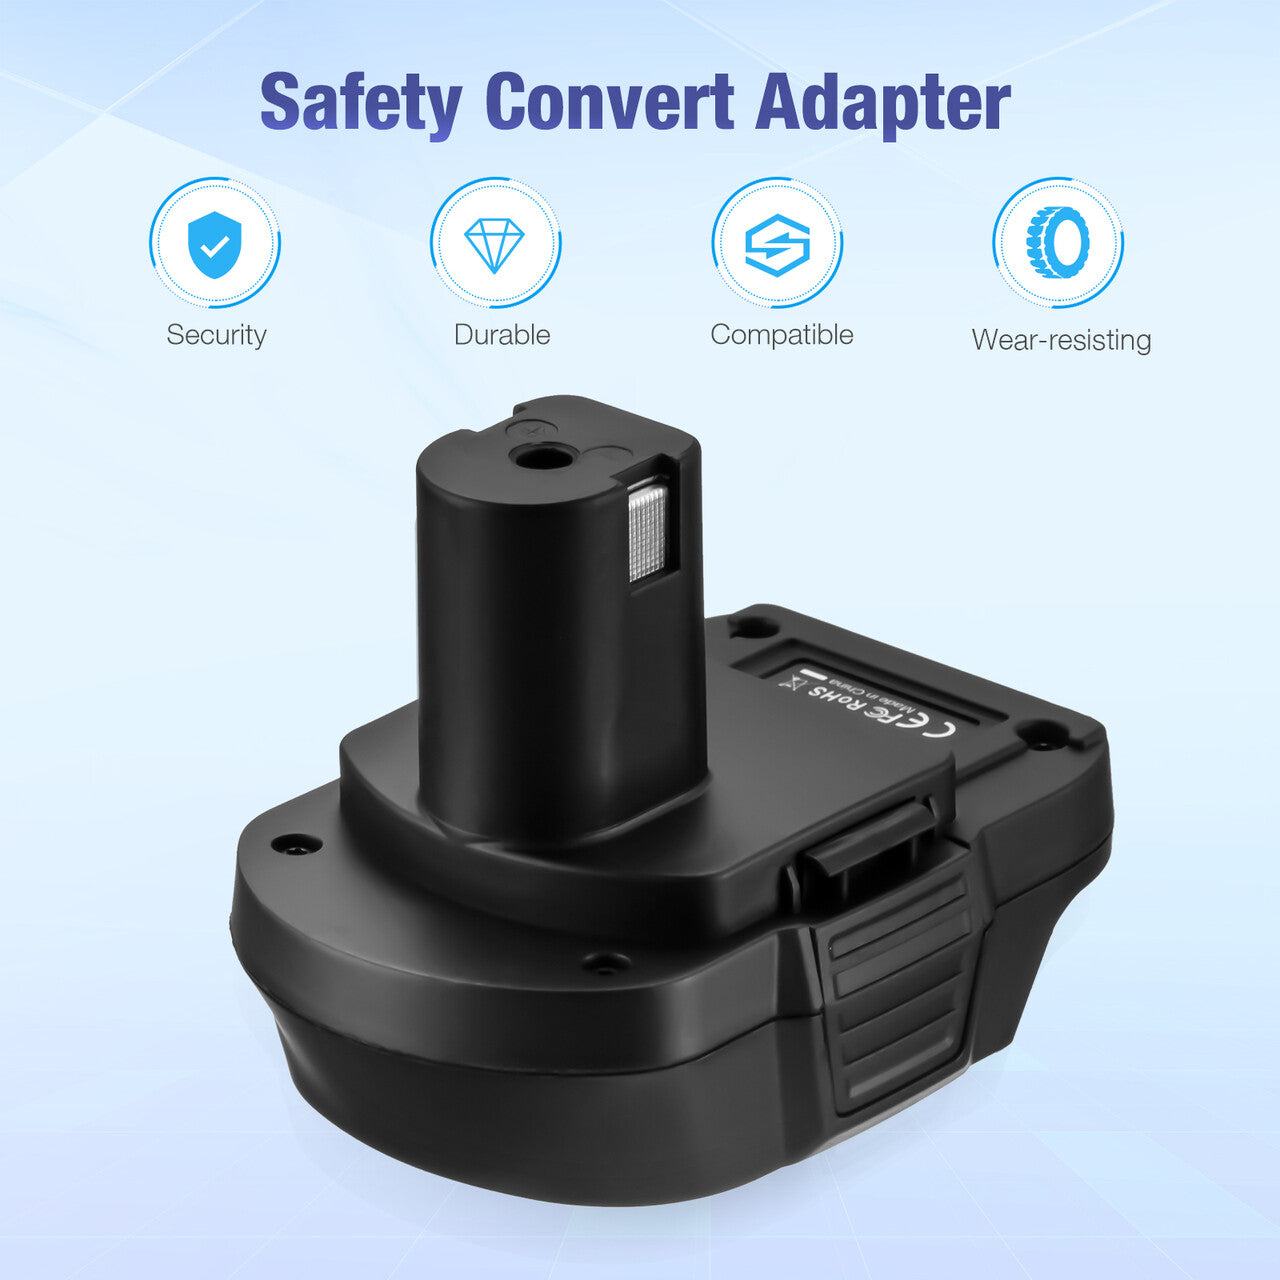 Battery Adapter Fits Ryobi 18v Cordless Tools, Compatible With